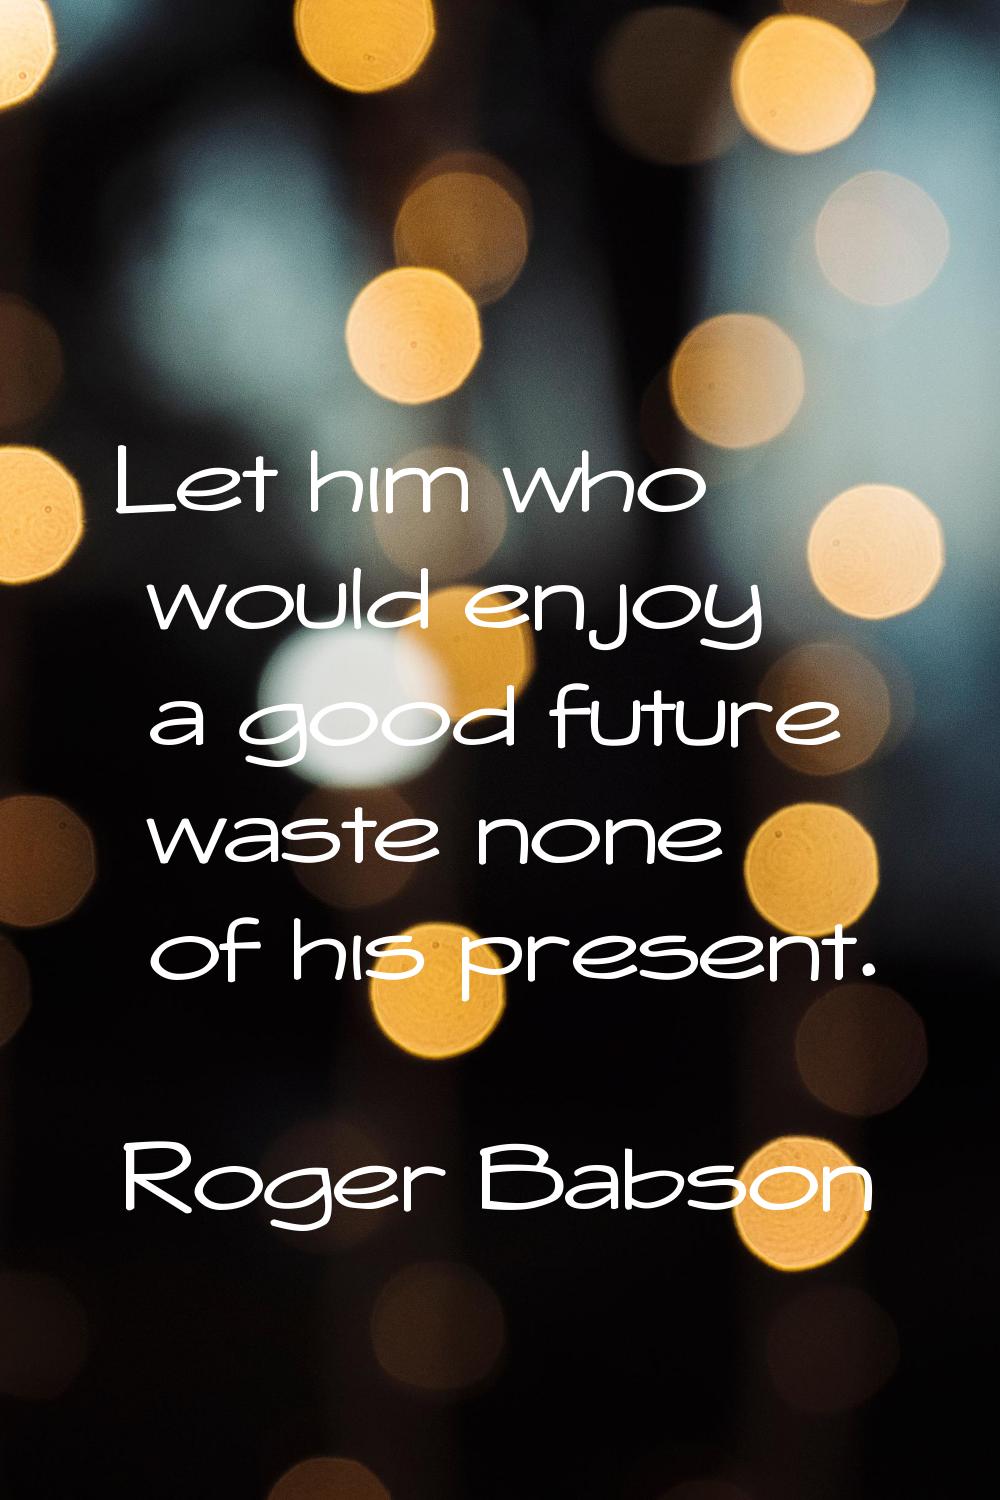 Let him who would enjoy a good future waste none of his present.